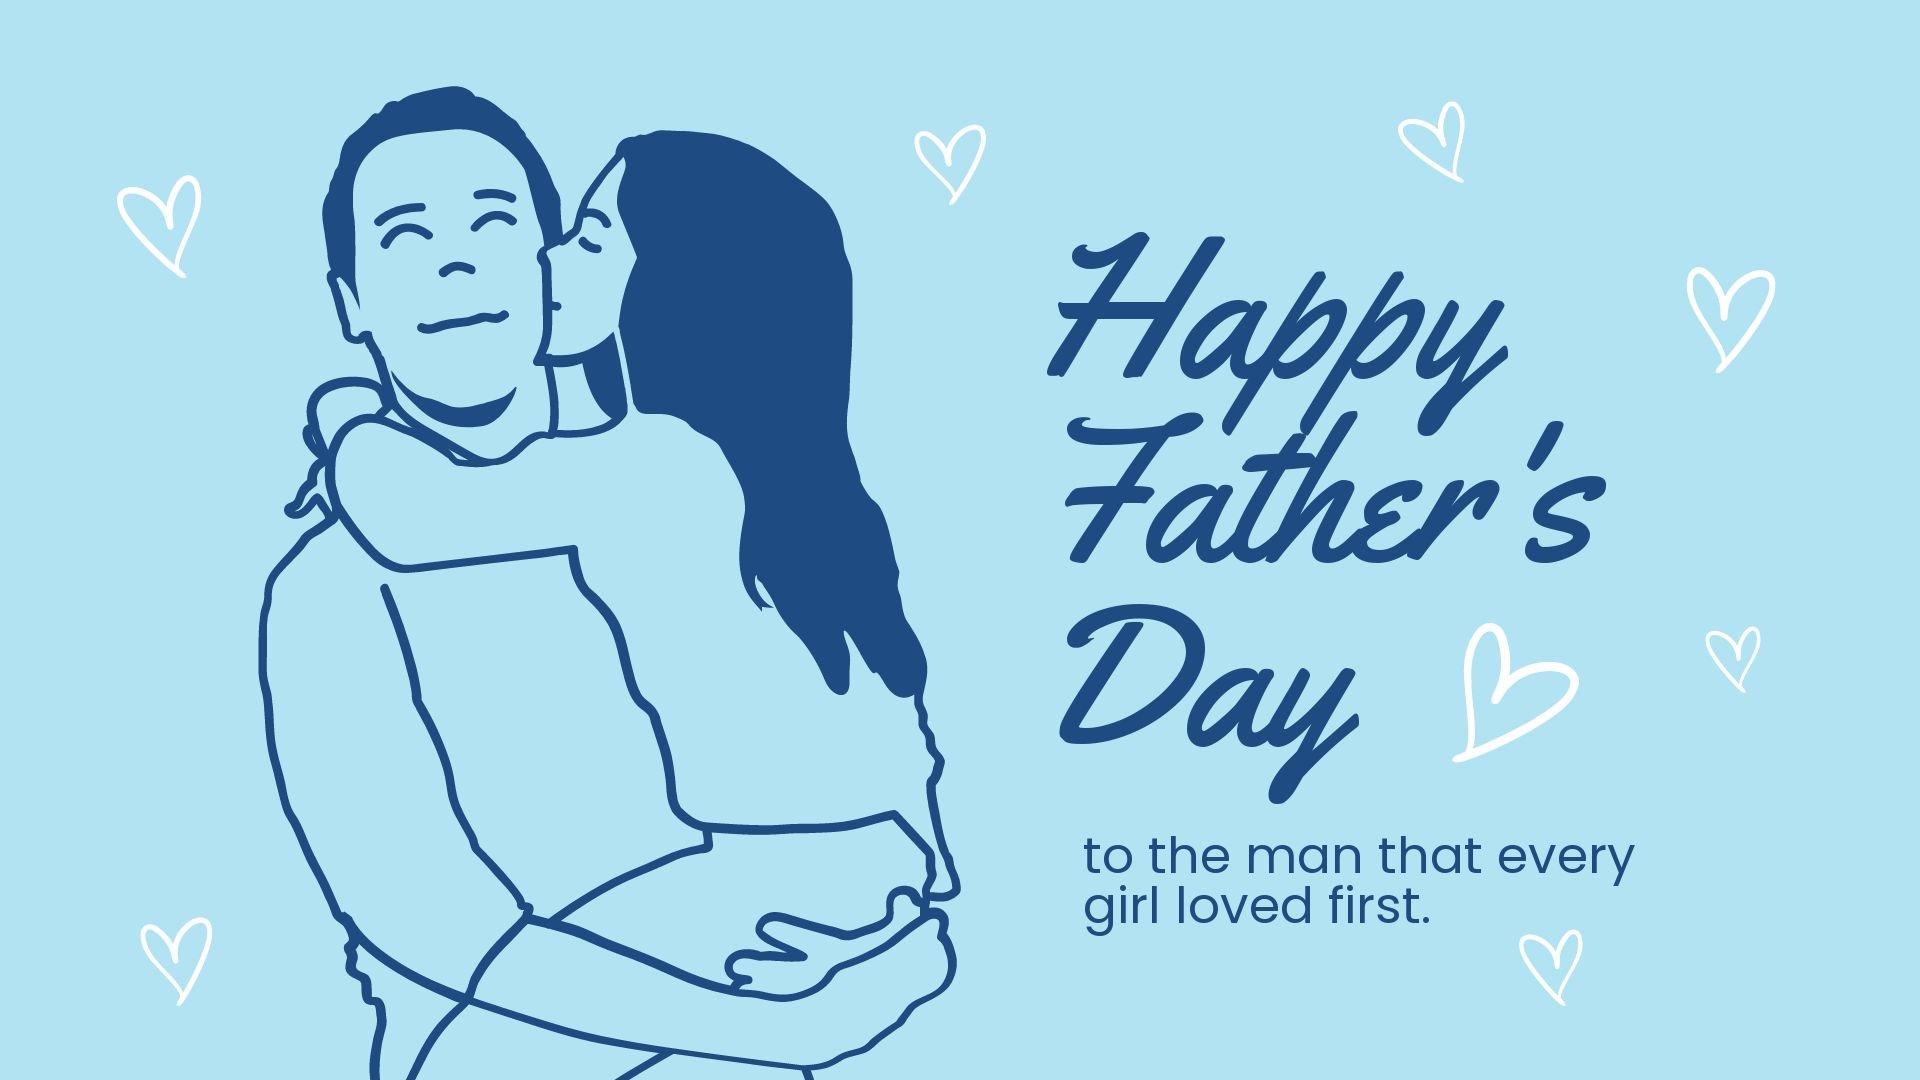 Free Happy Father's Day Wishes From Daughter Image in JPG